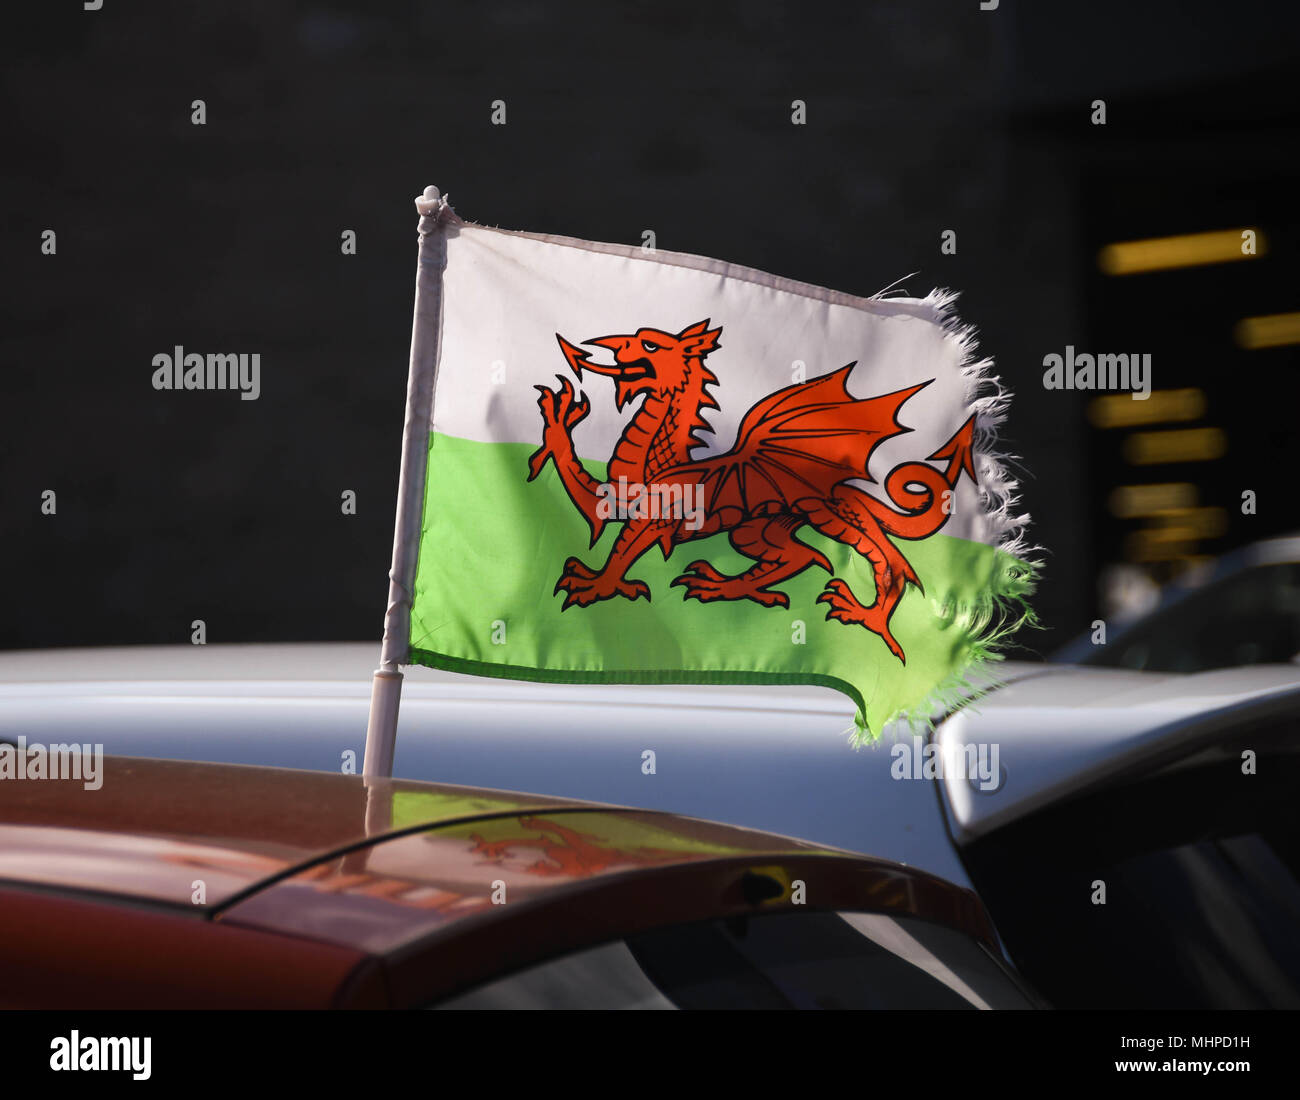 Small Welsh Rad Dragon flag with frayed edges flying from a car Stock Photo